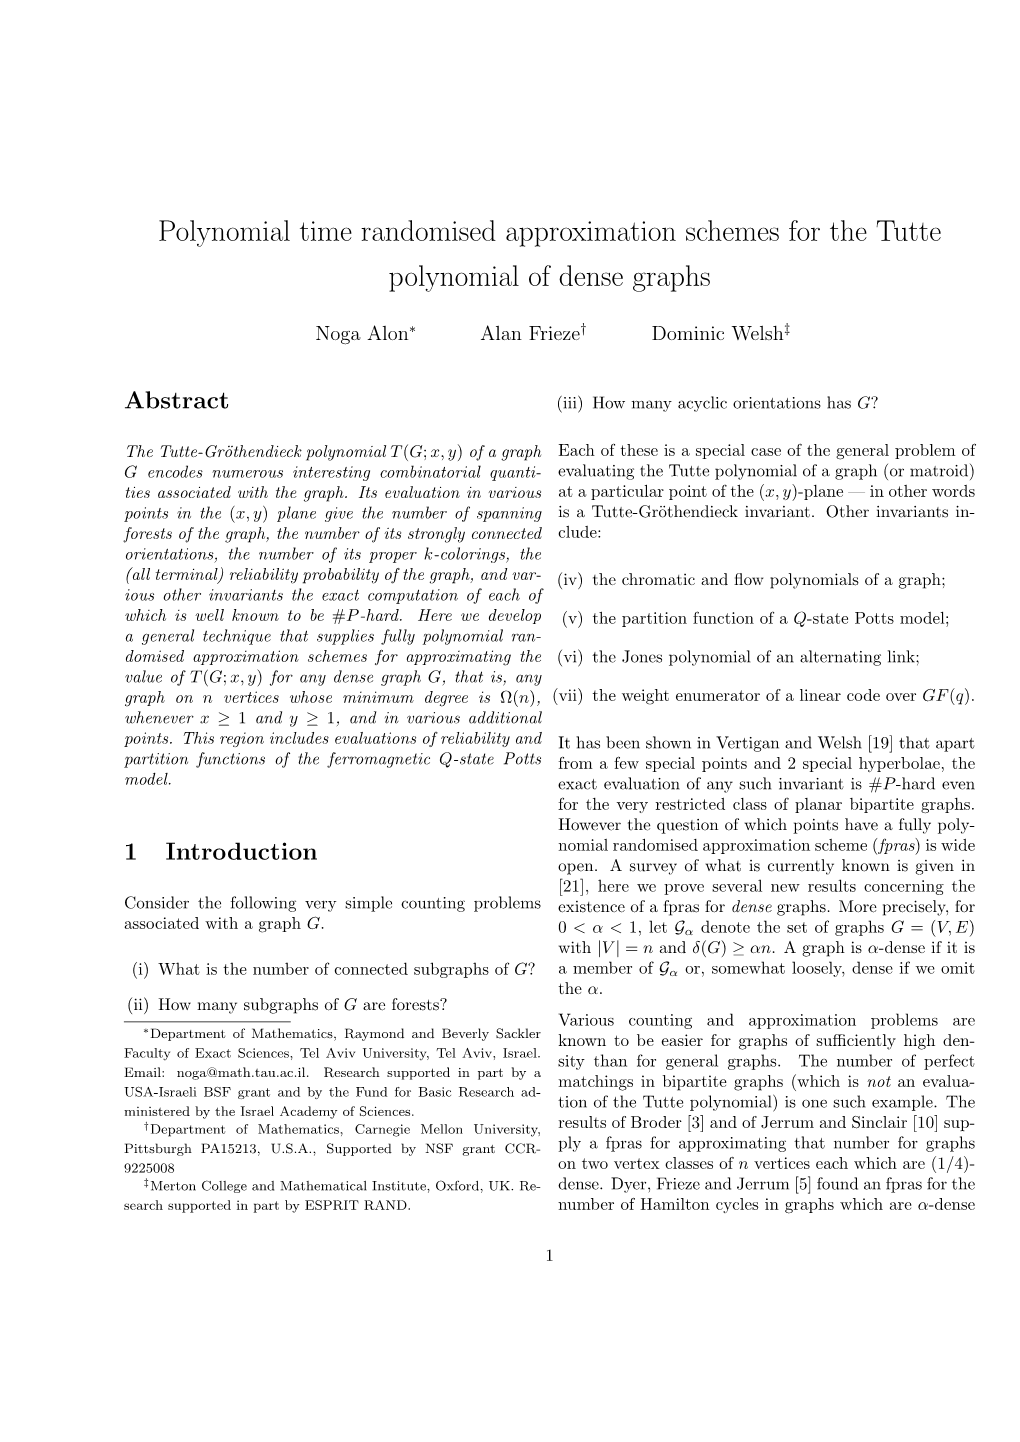 Polynomial Time Randomised Approximation Schemes for the Tutte Polynomial of Dense Graphs